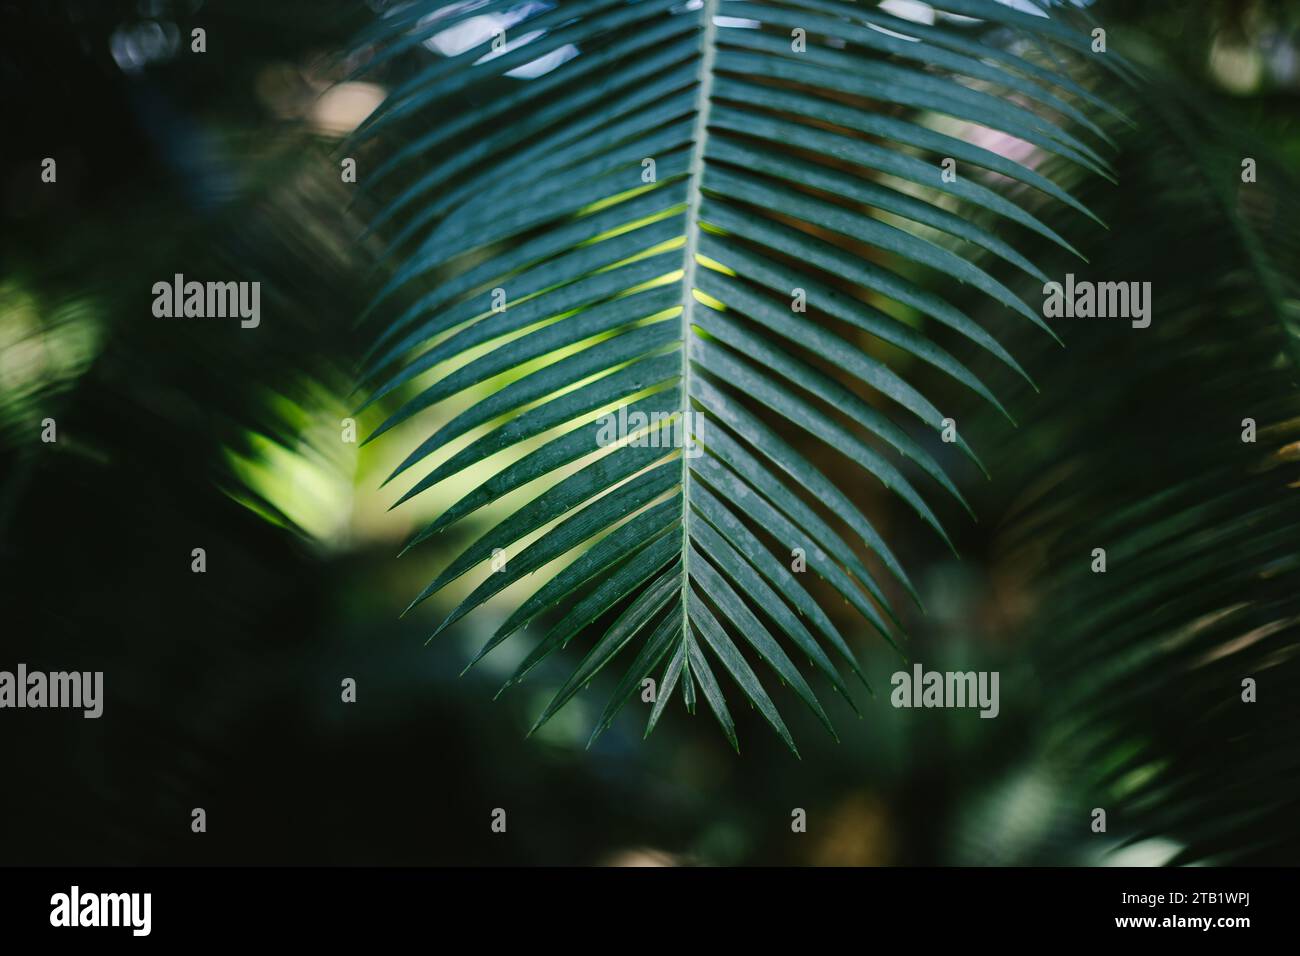 Leaf of palm tree with spiky leaves and greenery Stock Photo